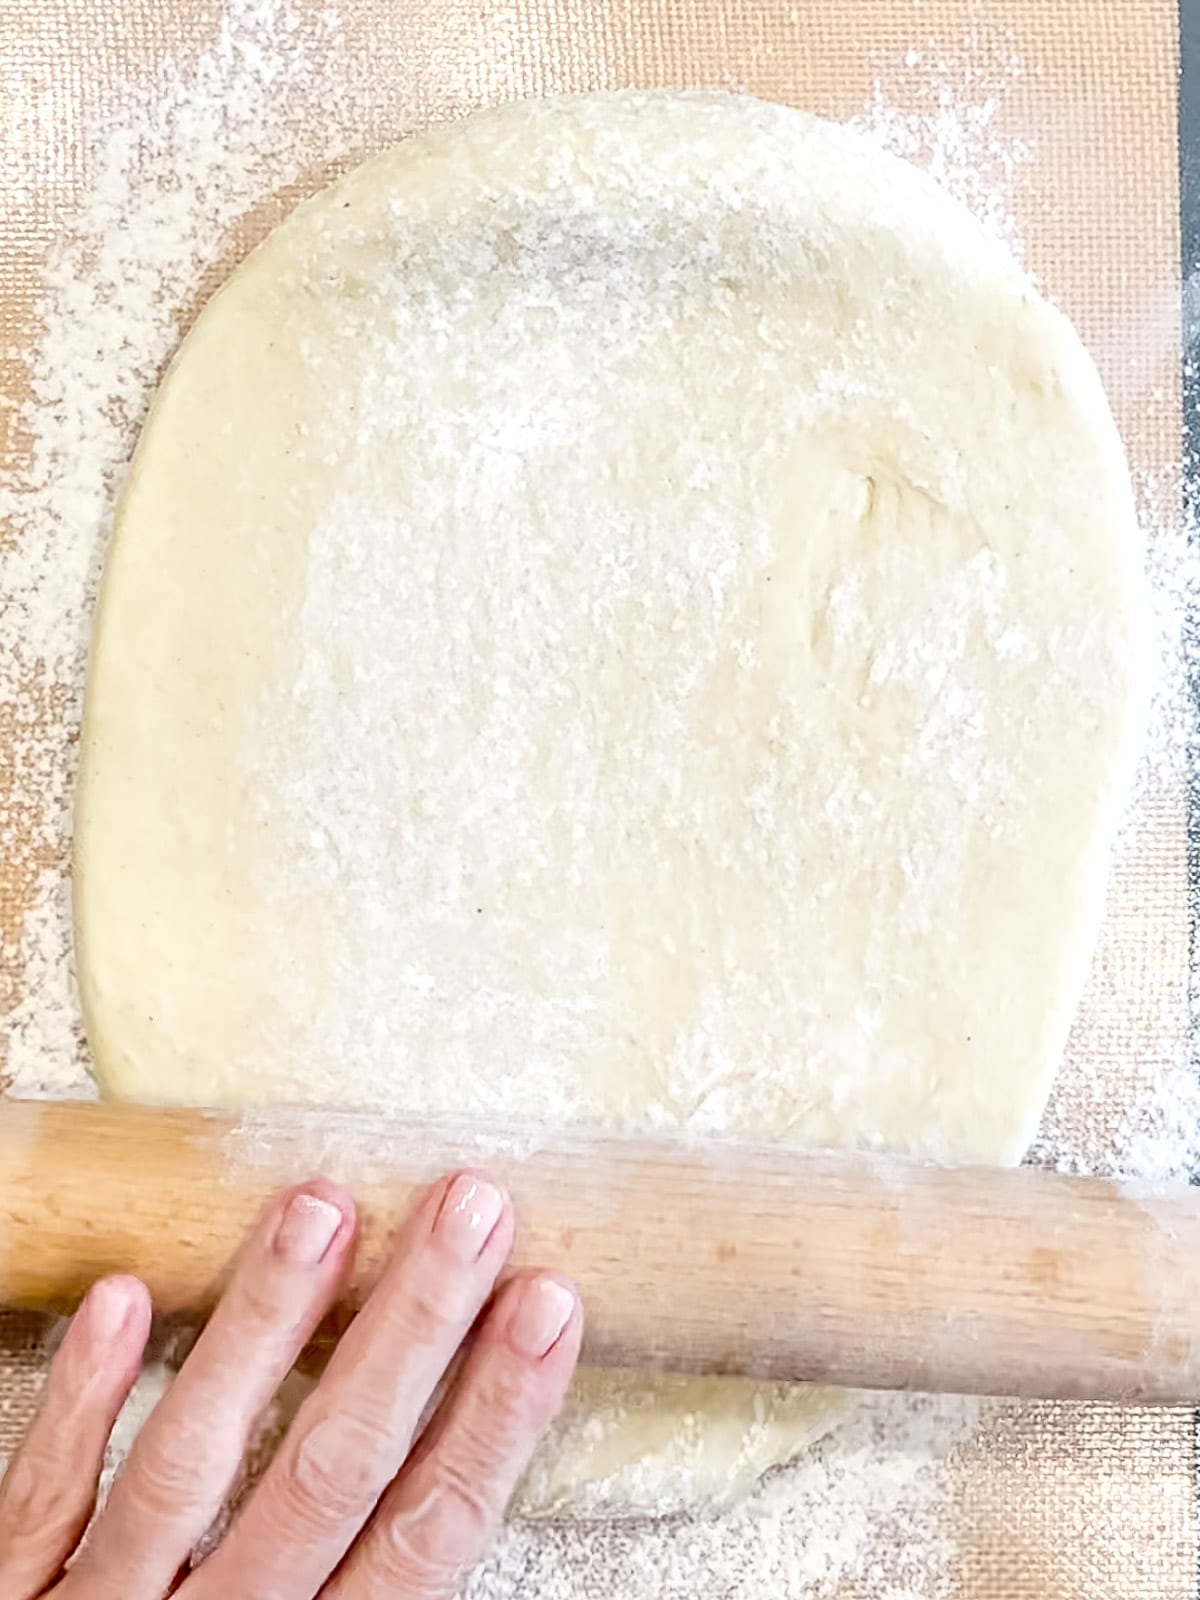 Rolling out dough to make cinnamon rolls.